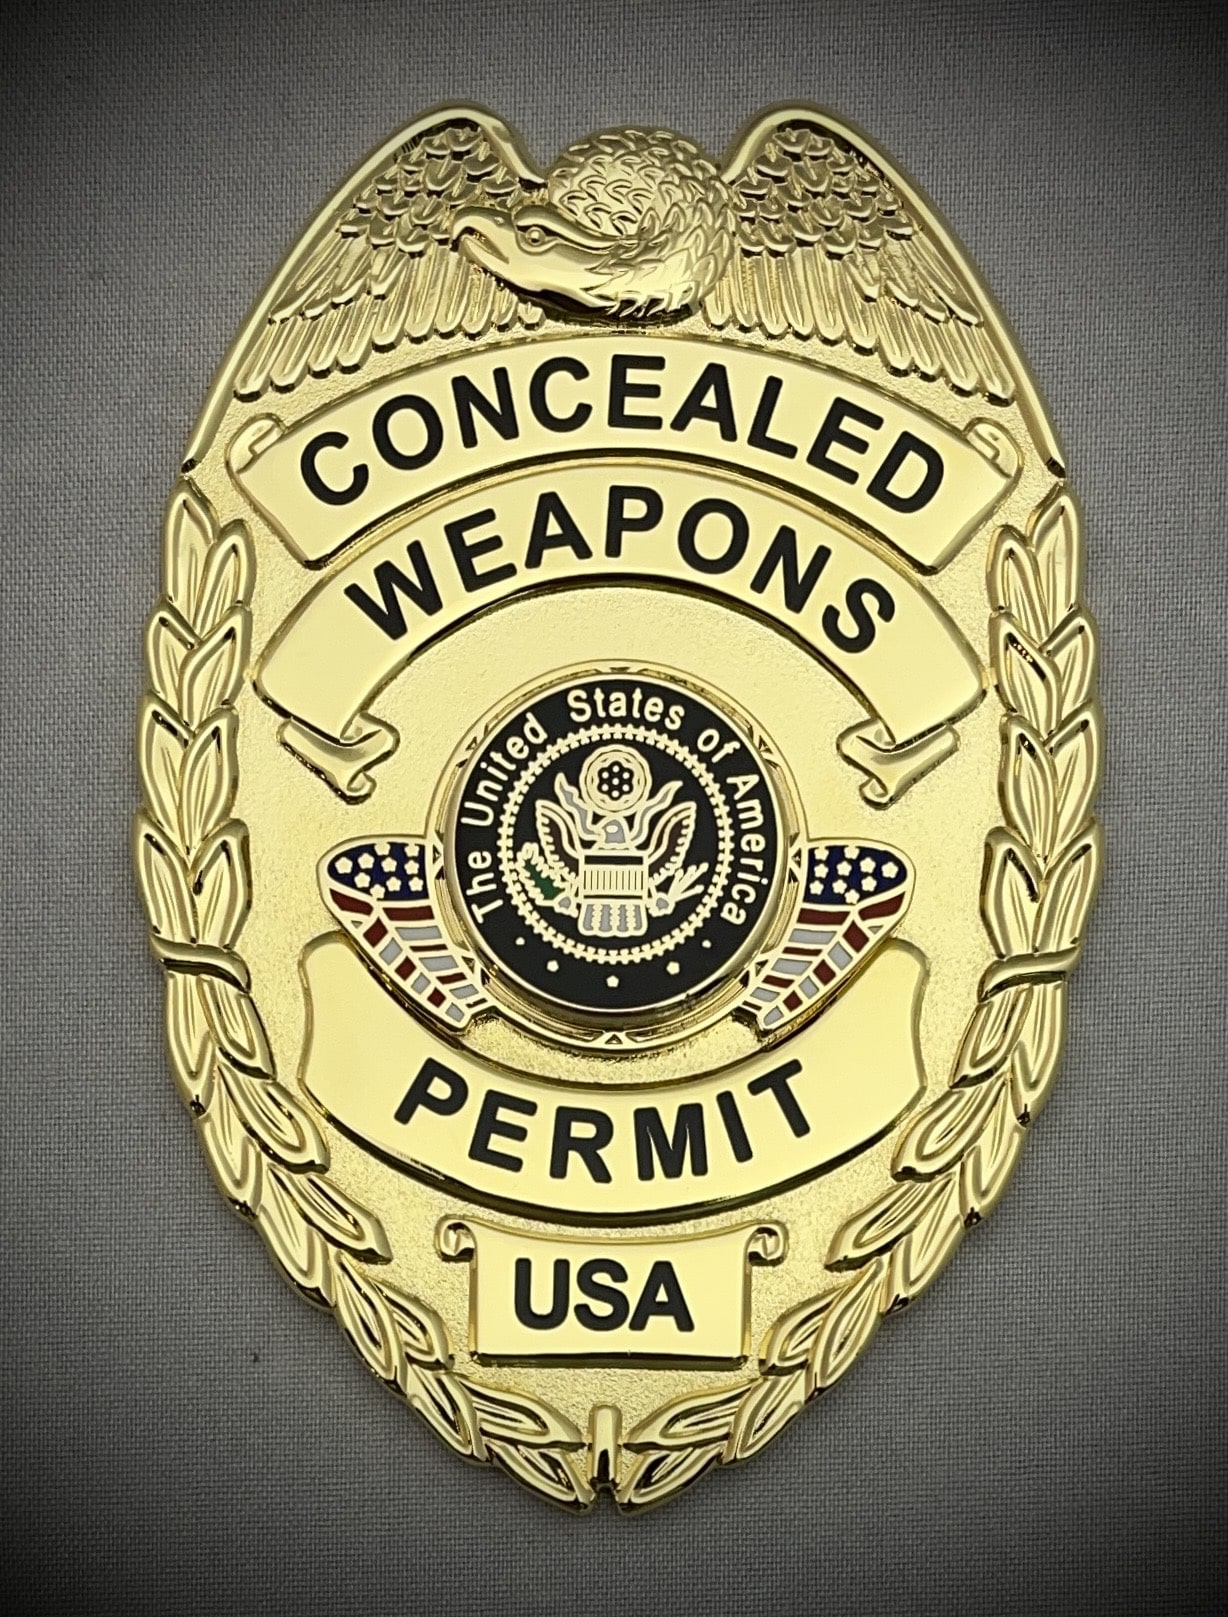 Concealed Weapons Permit Badge with Center Flags